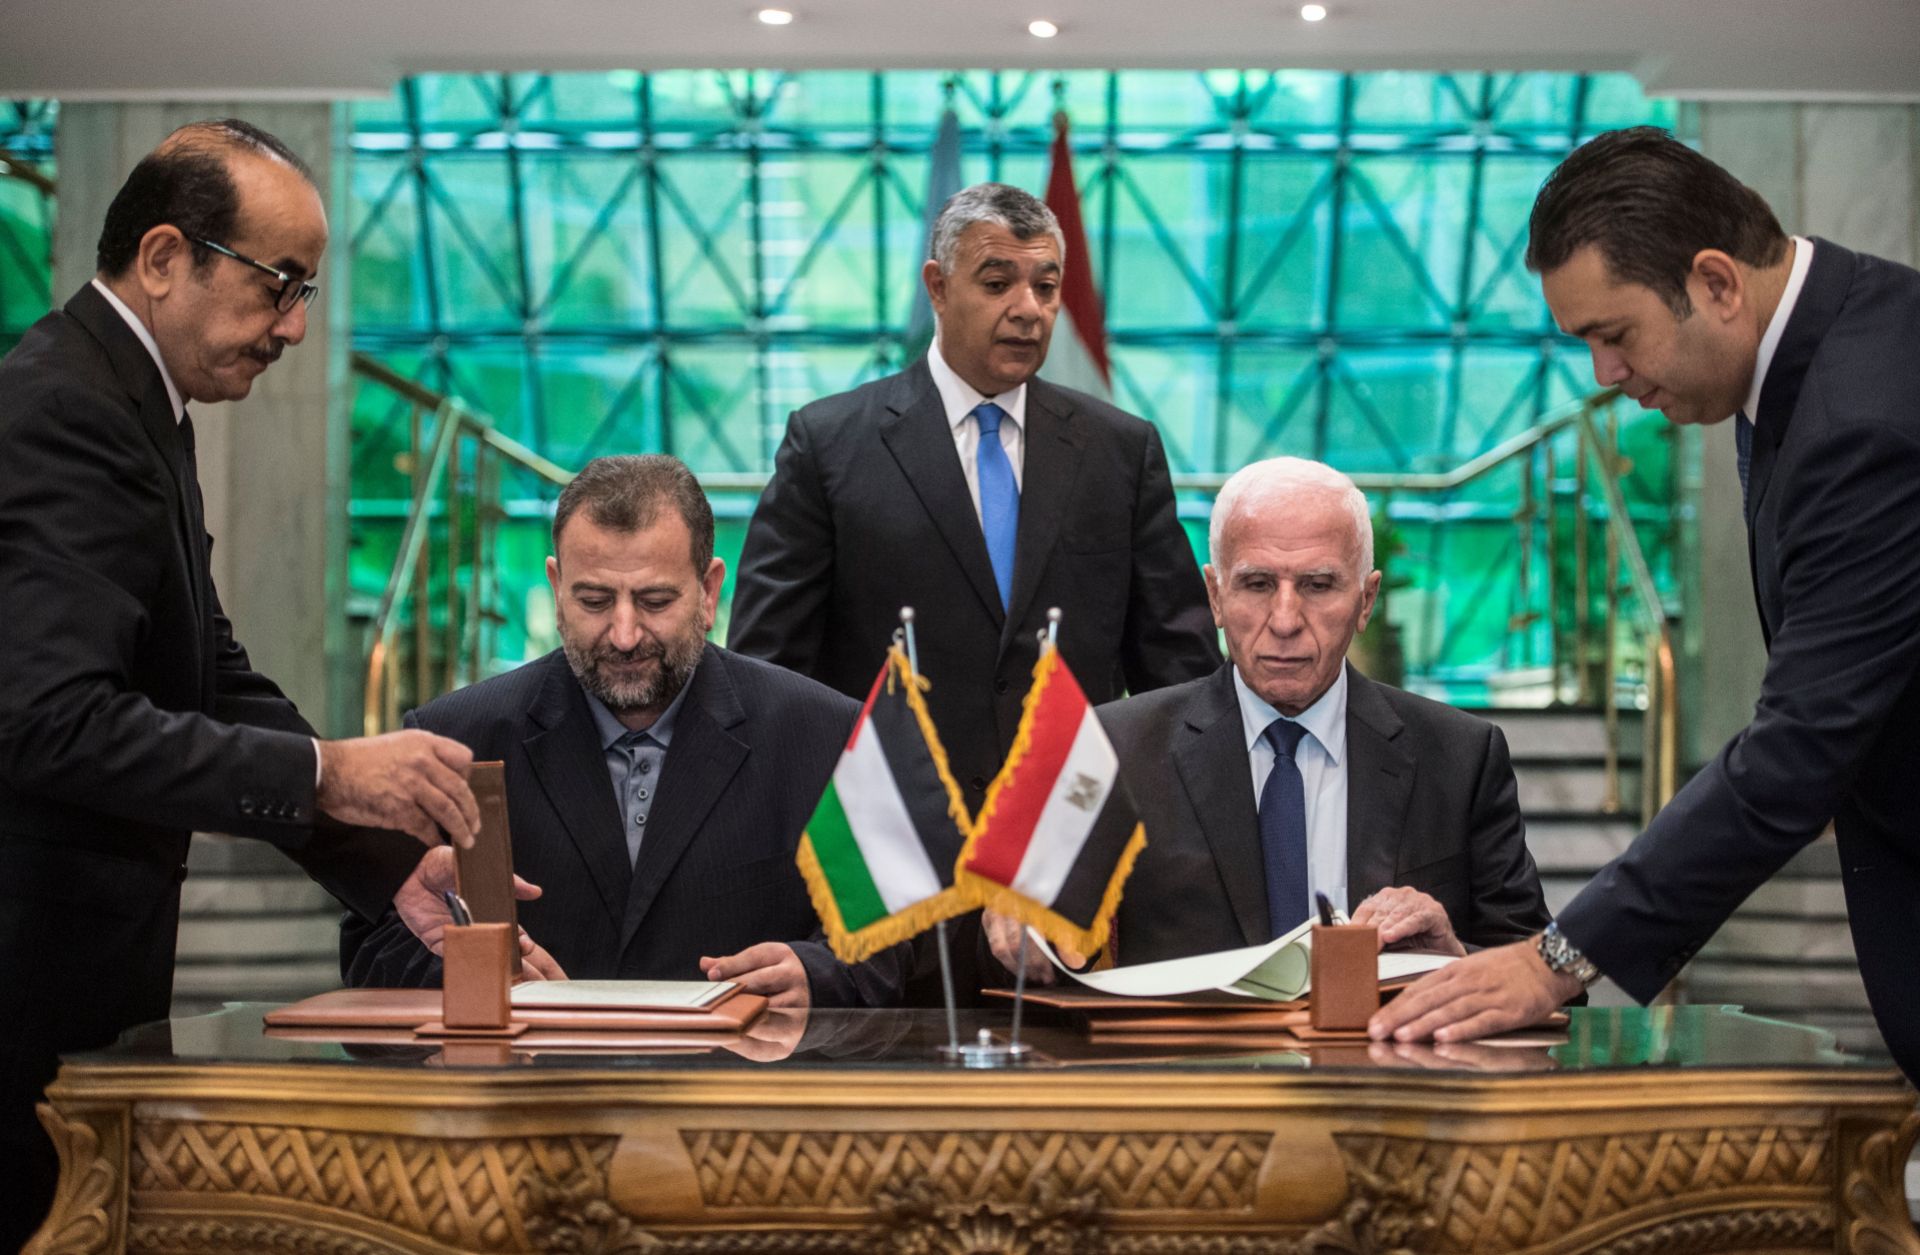 The leaders of Fatah and Hamas sign a reconciliation deal at the Egyptian intelligence services headquarters in Cairo on Oct. 12, ending their decadelong split.